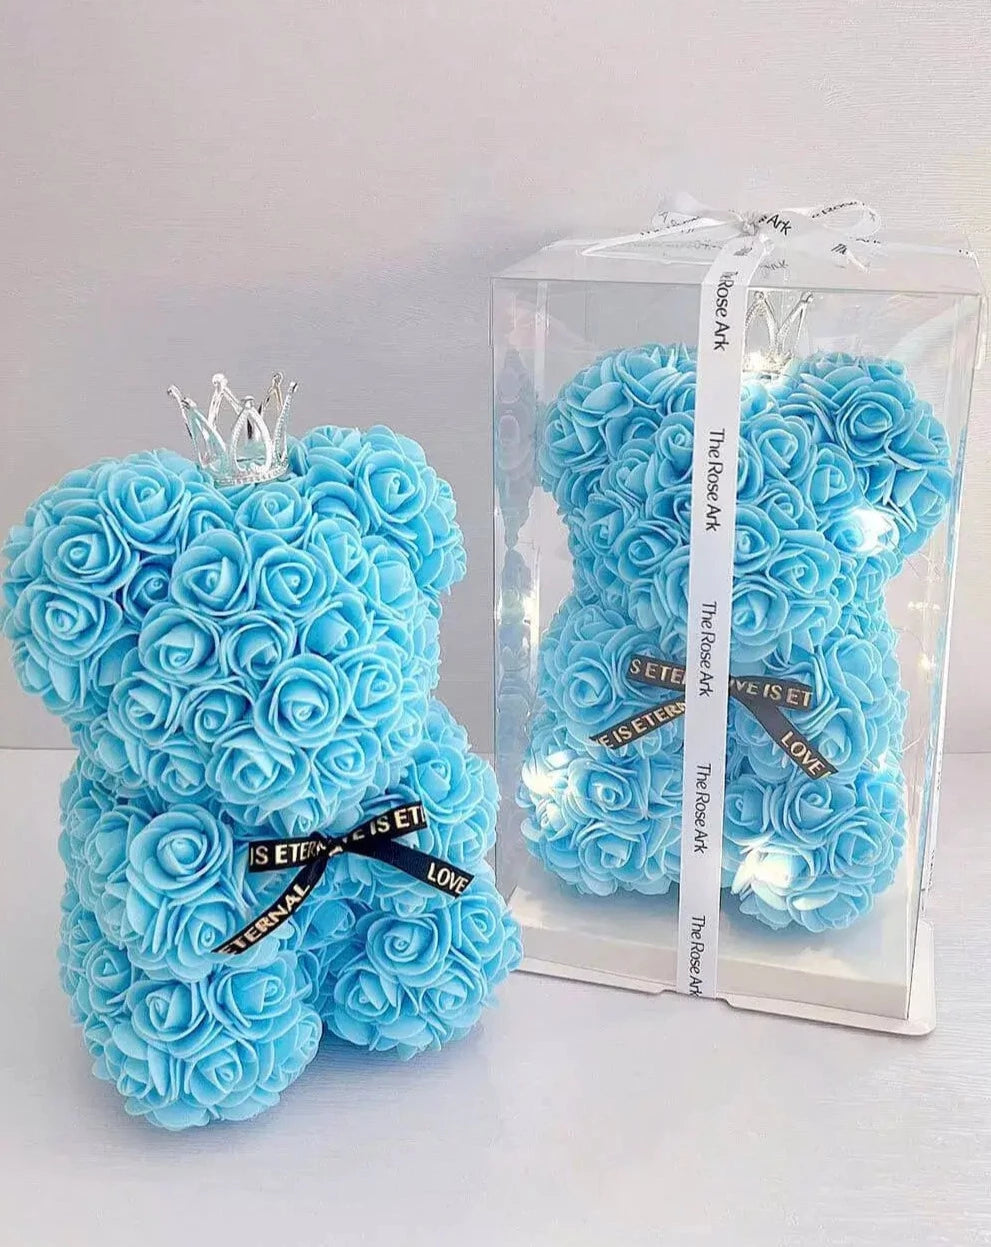 25cm Sky Blue Rose Bear with Fairy Lights in Box The Rose Ark